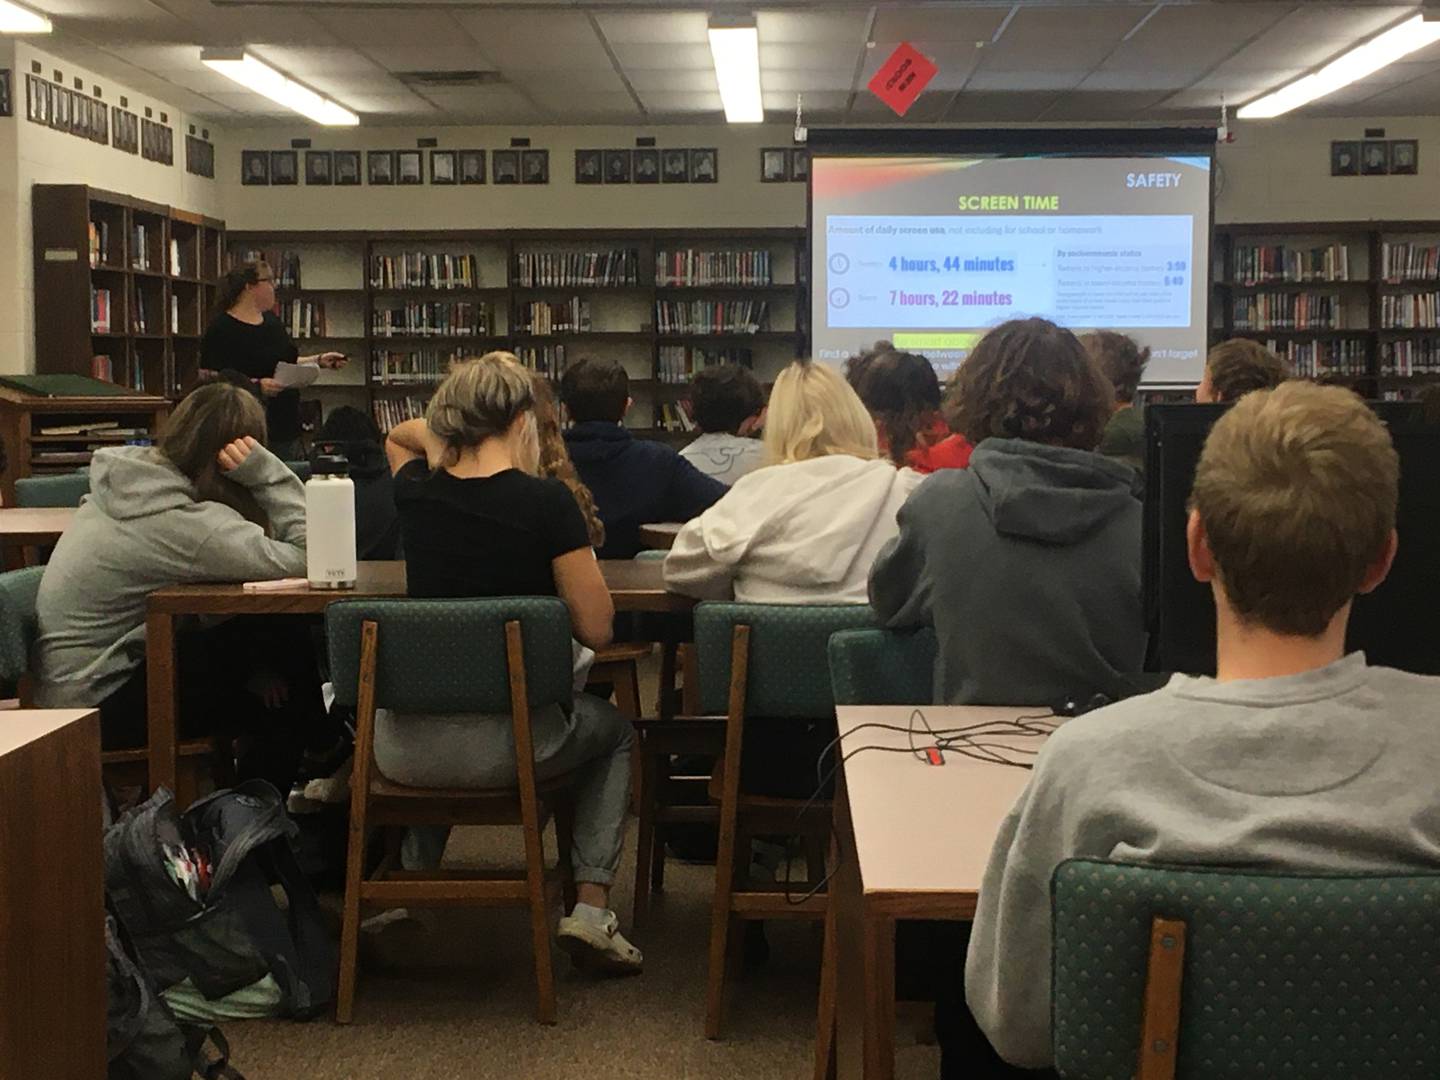 Aileen Koesche, Lincoln-Way Central’s media center director, gives a presentation to students about media literacy.
Photo courtesy of Lincoln-Way Community High School District 210